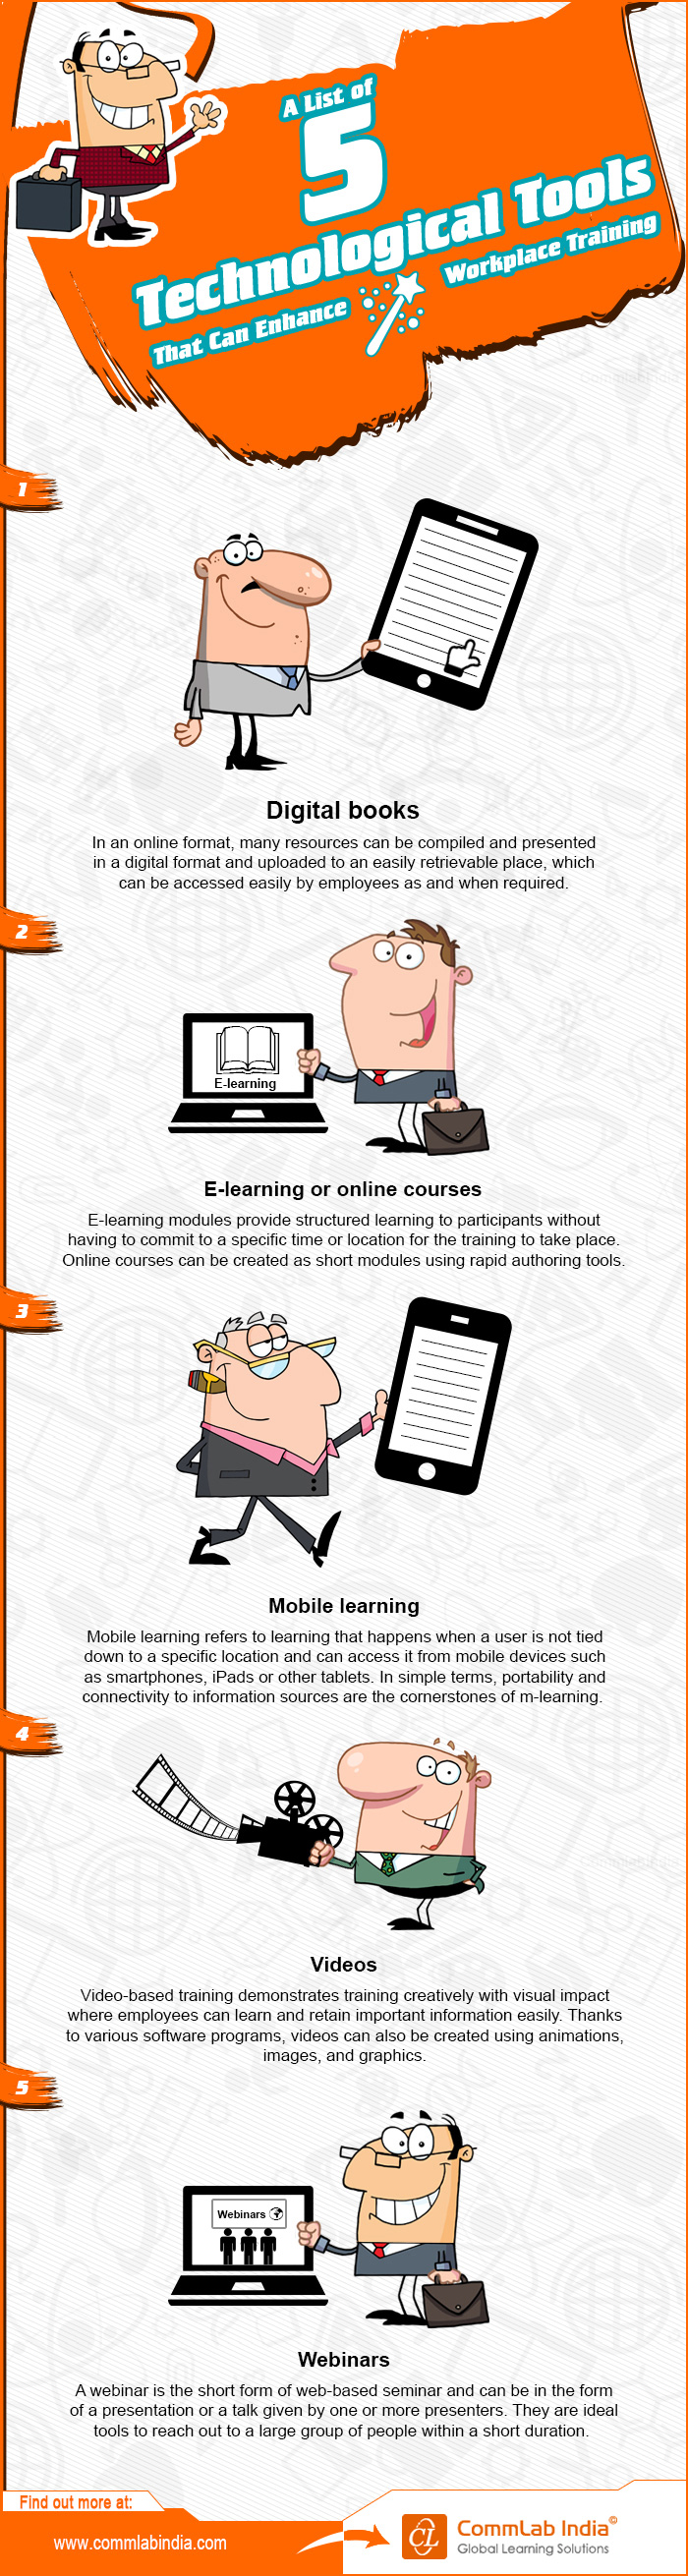 5 Technological Tools to Enhance Your Workplace Training [Infographic]